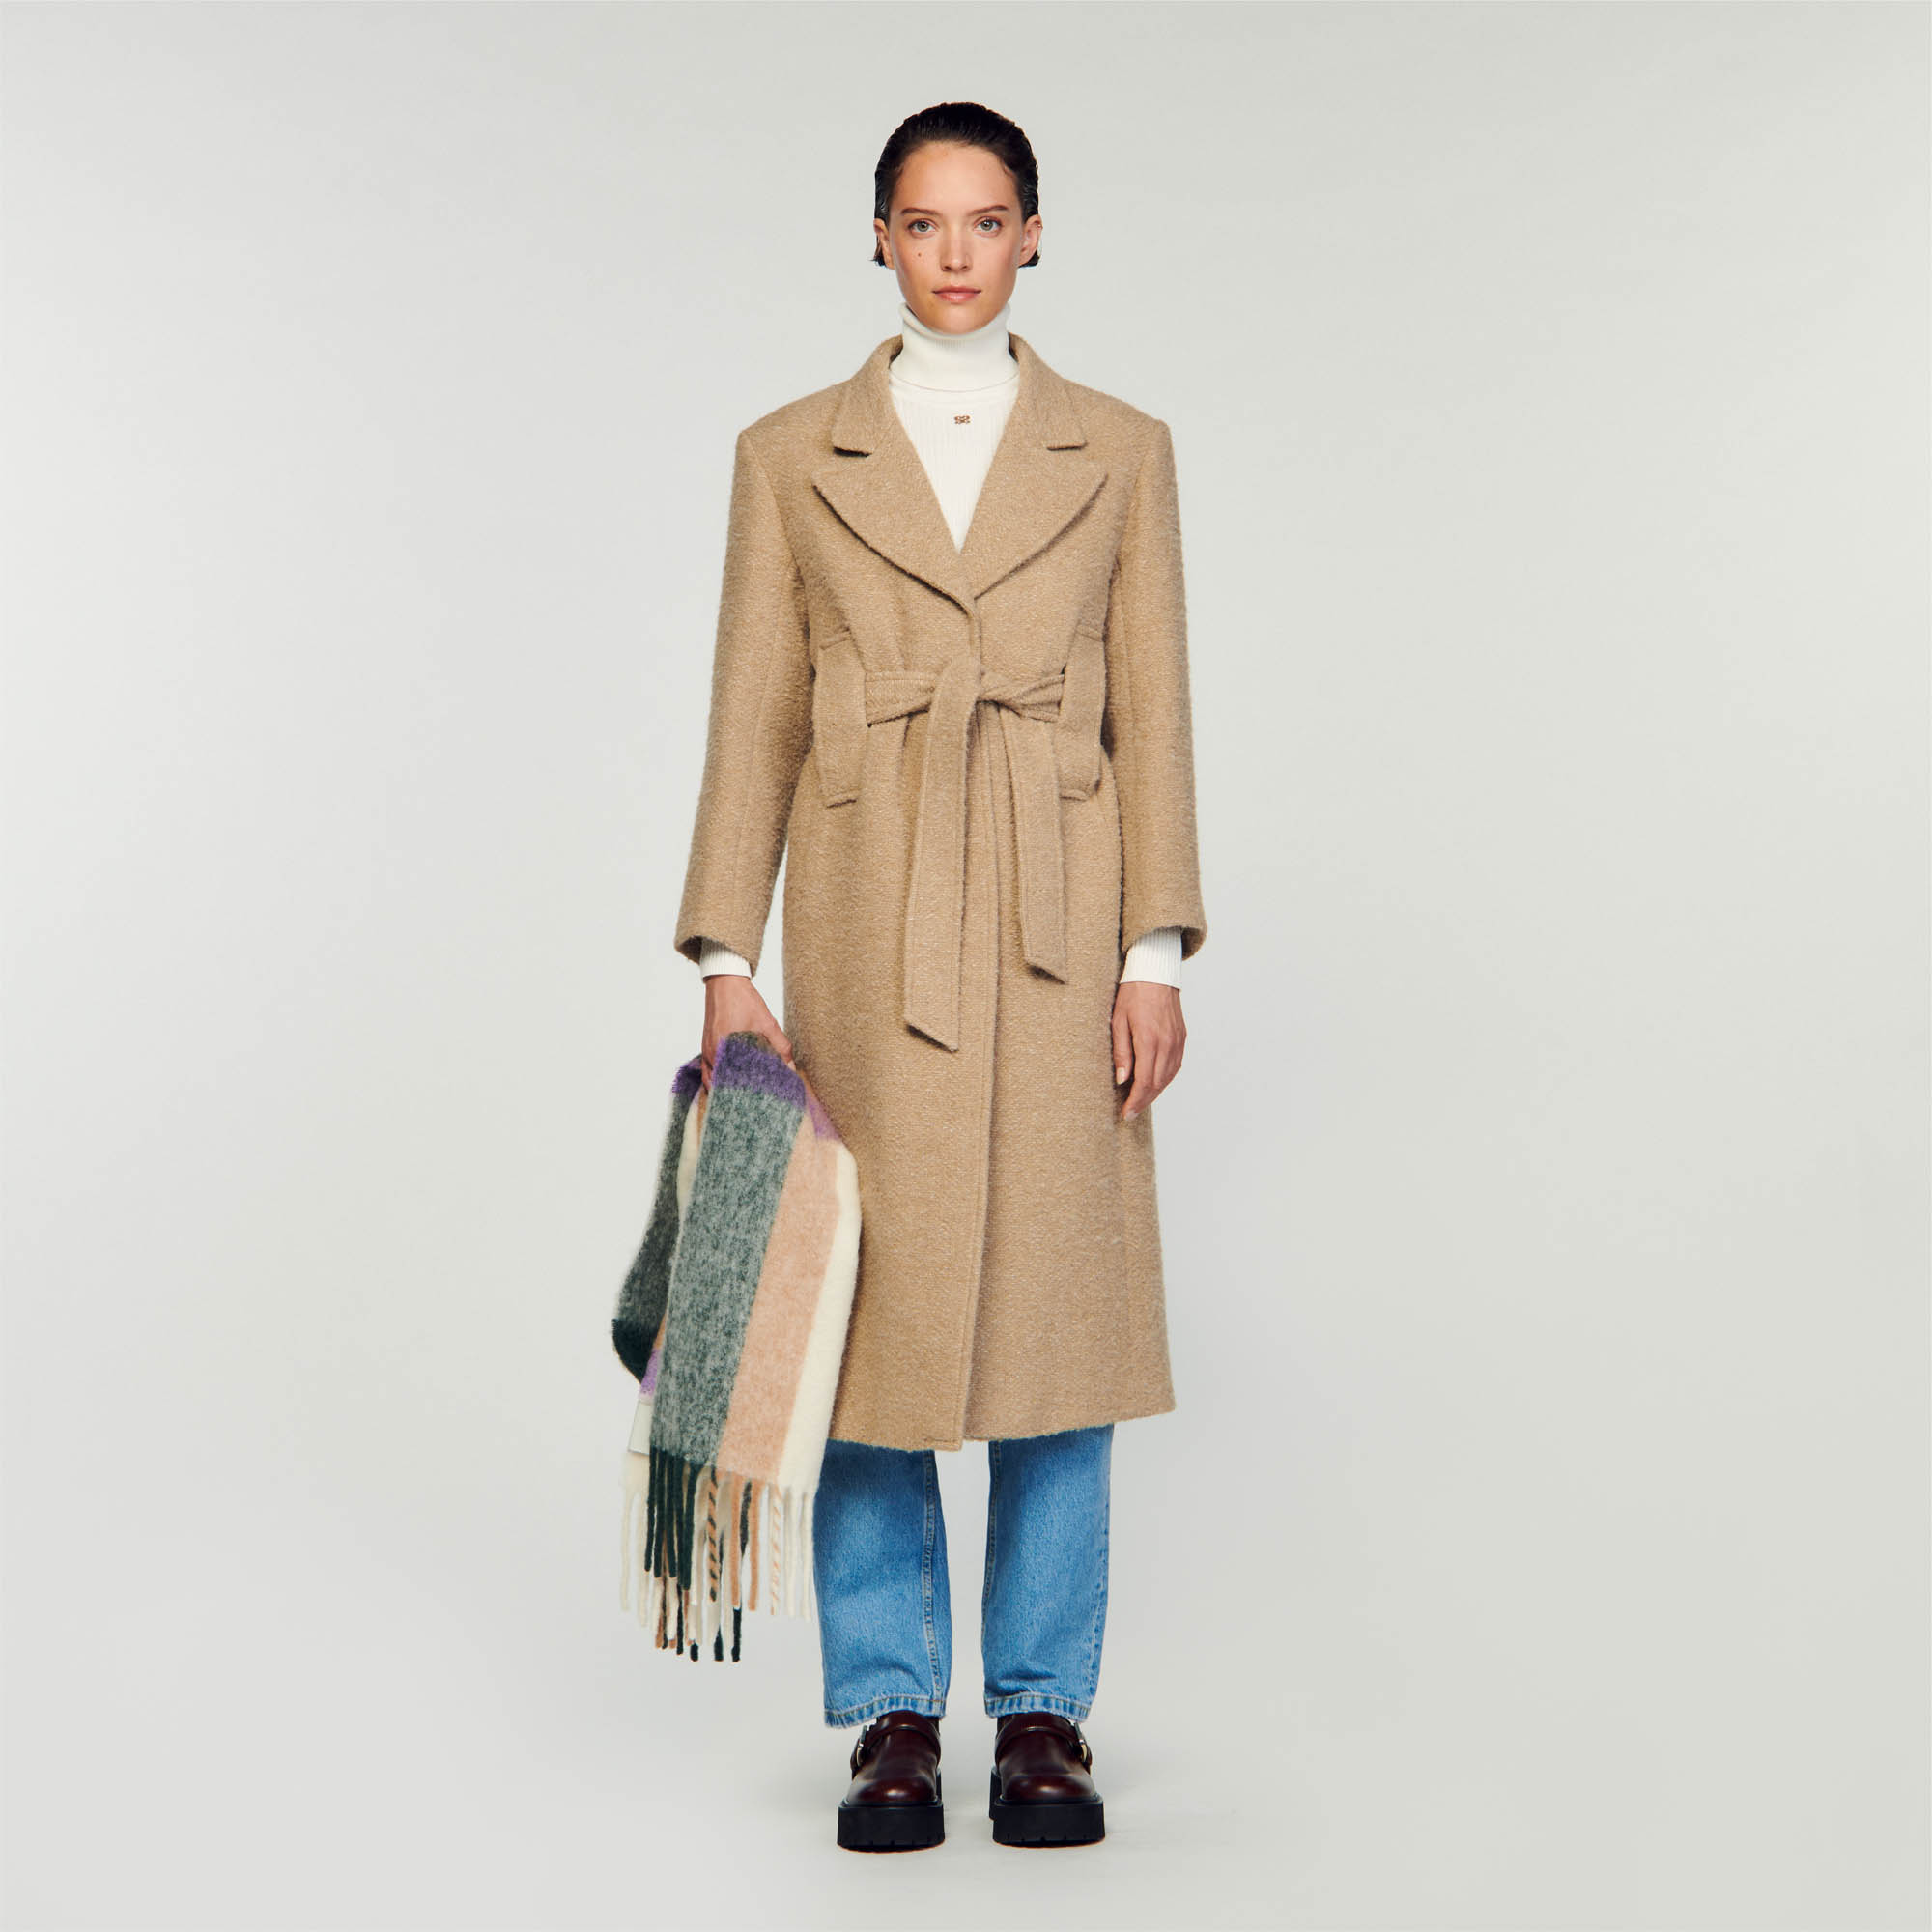 Sandro cotton Slim-fit long coat in bouclé fabric with long sleeves featuring plackets on the cuffs, a wide turn-up lapel collar, a flap at the back and a tone-on-tone tie belt on the waist